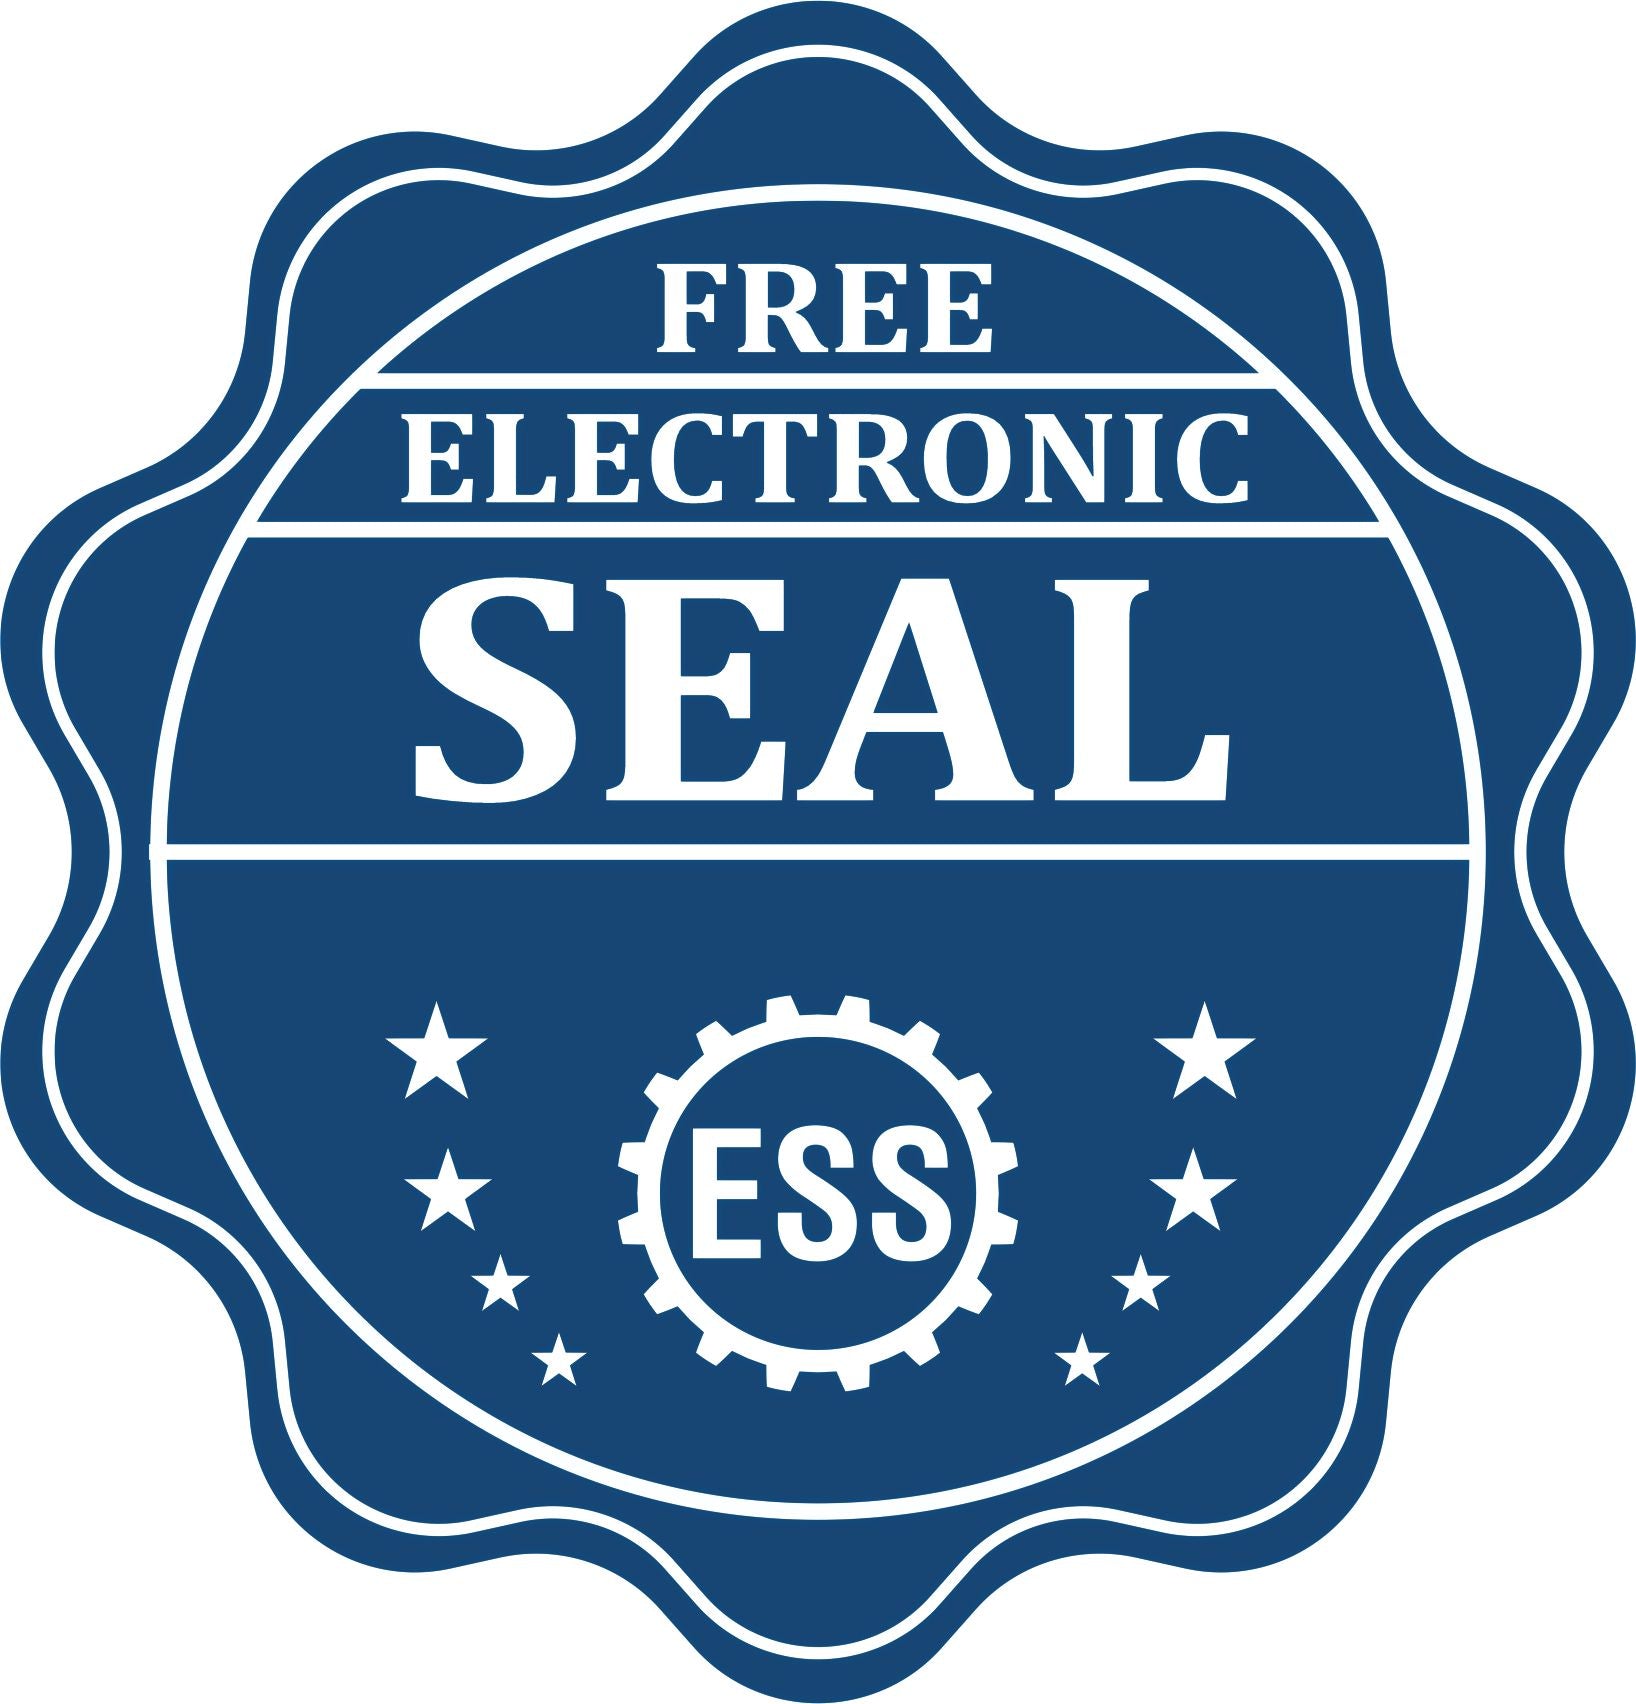 A badge showing a free electronic seal for the Extended Long Reach Mississippi Surveyor Embosser with stars and the ESS gear on the emblem.